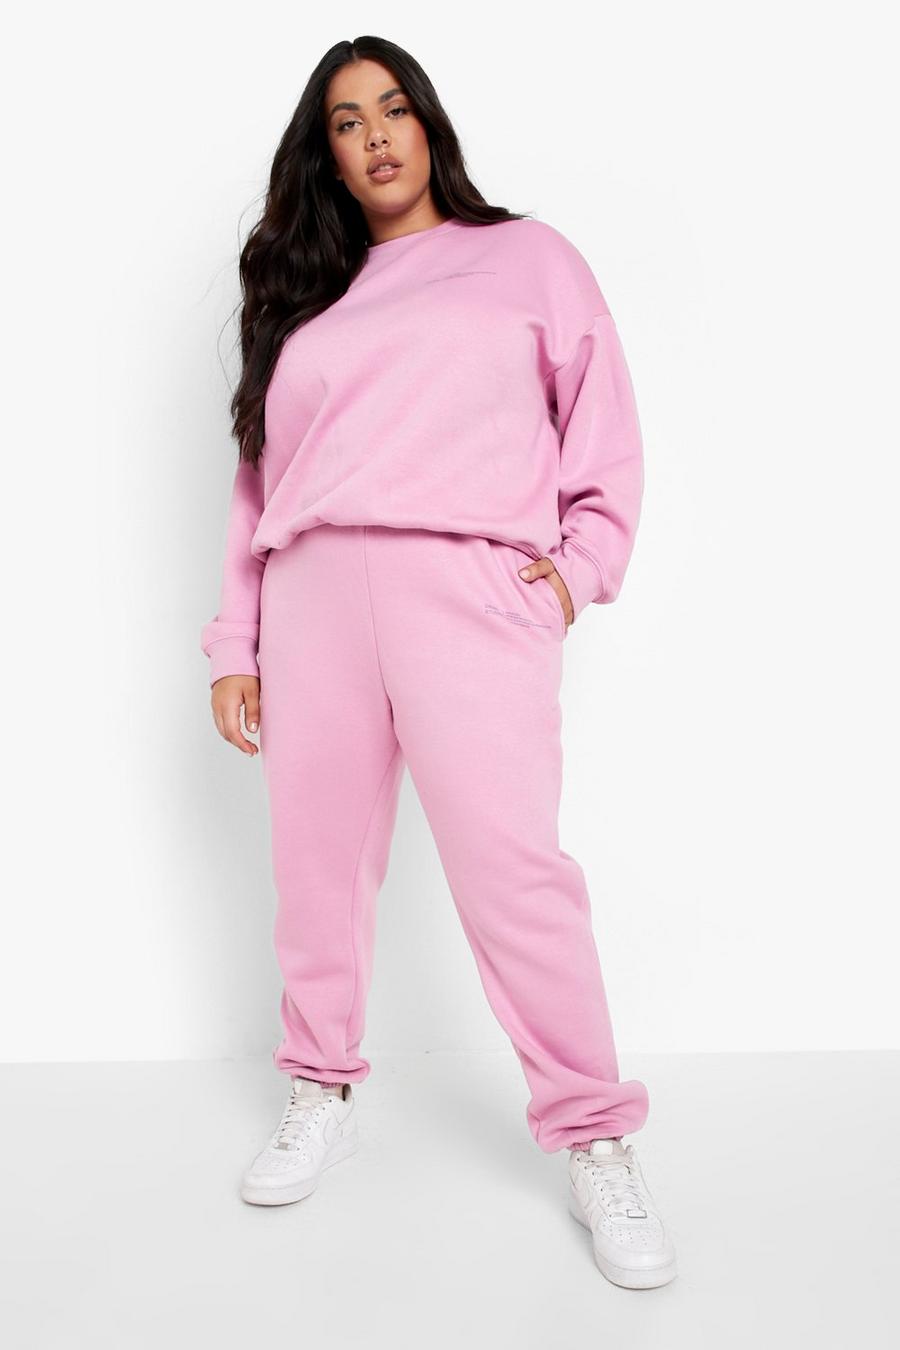 Winwinus Womens Solid-Colored Plus-Size Fashion Casual Tracksuit Set